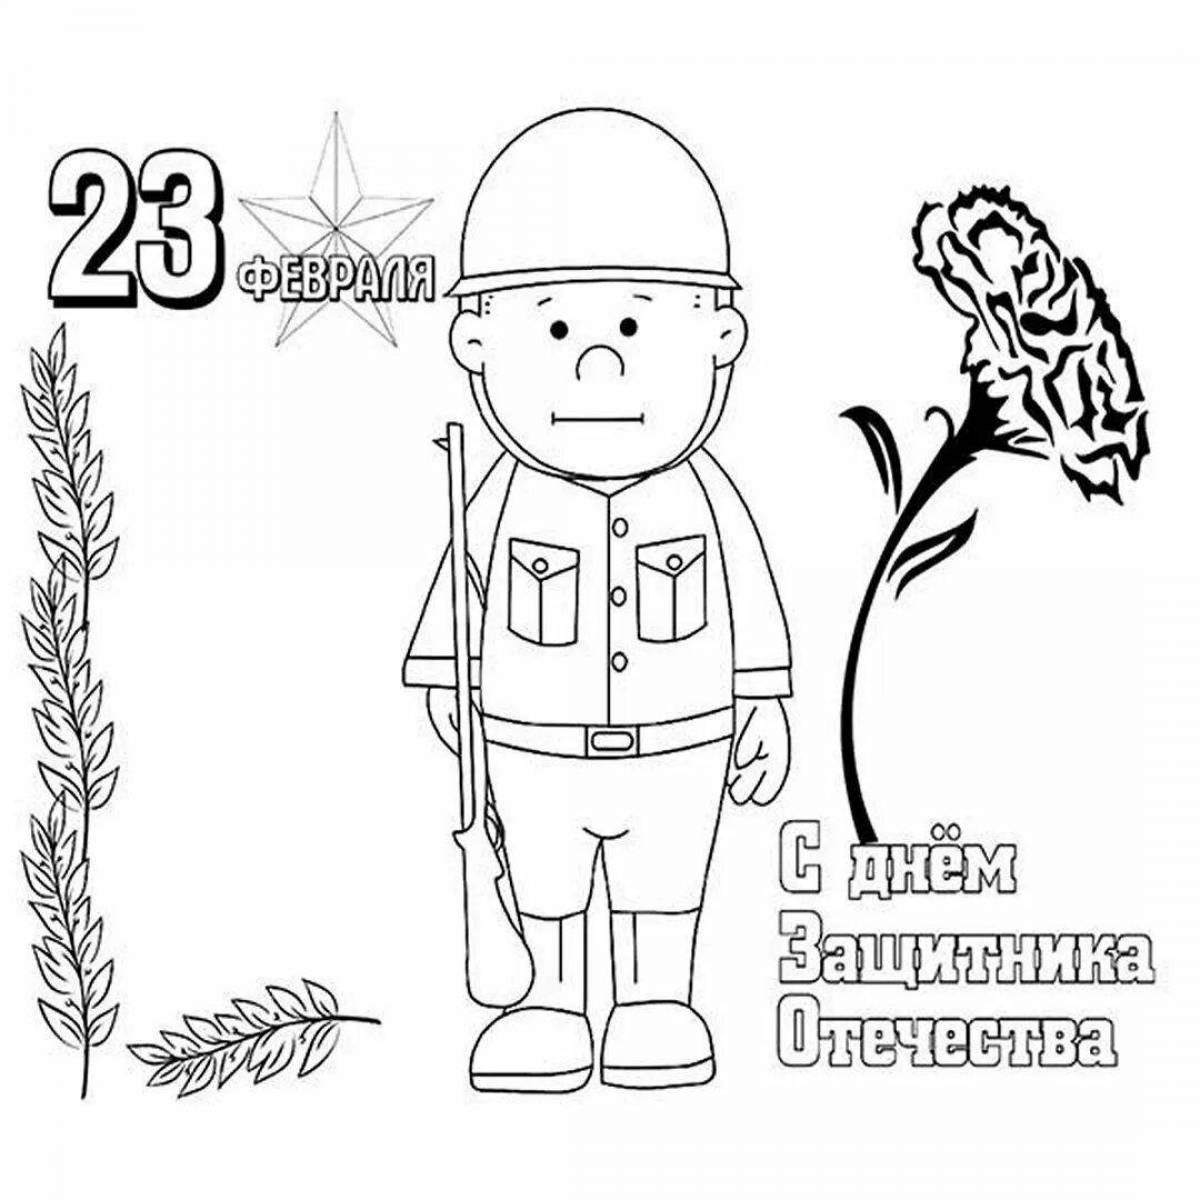 Coloring page brilliant defenders of the fatherland